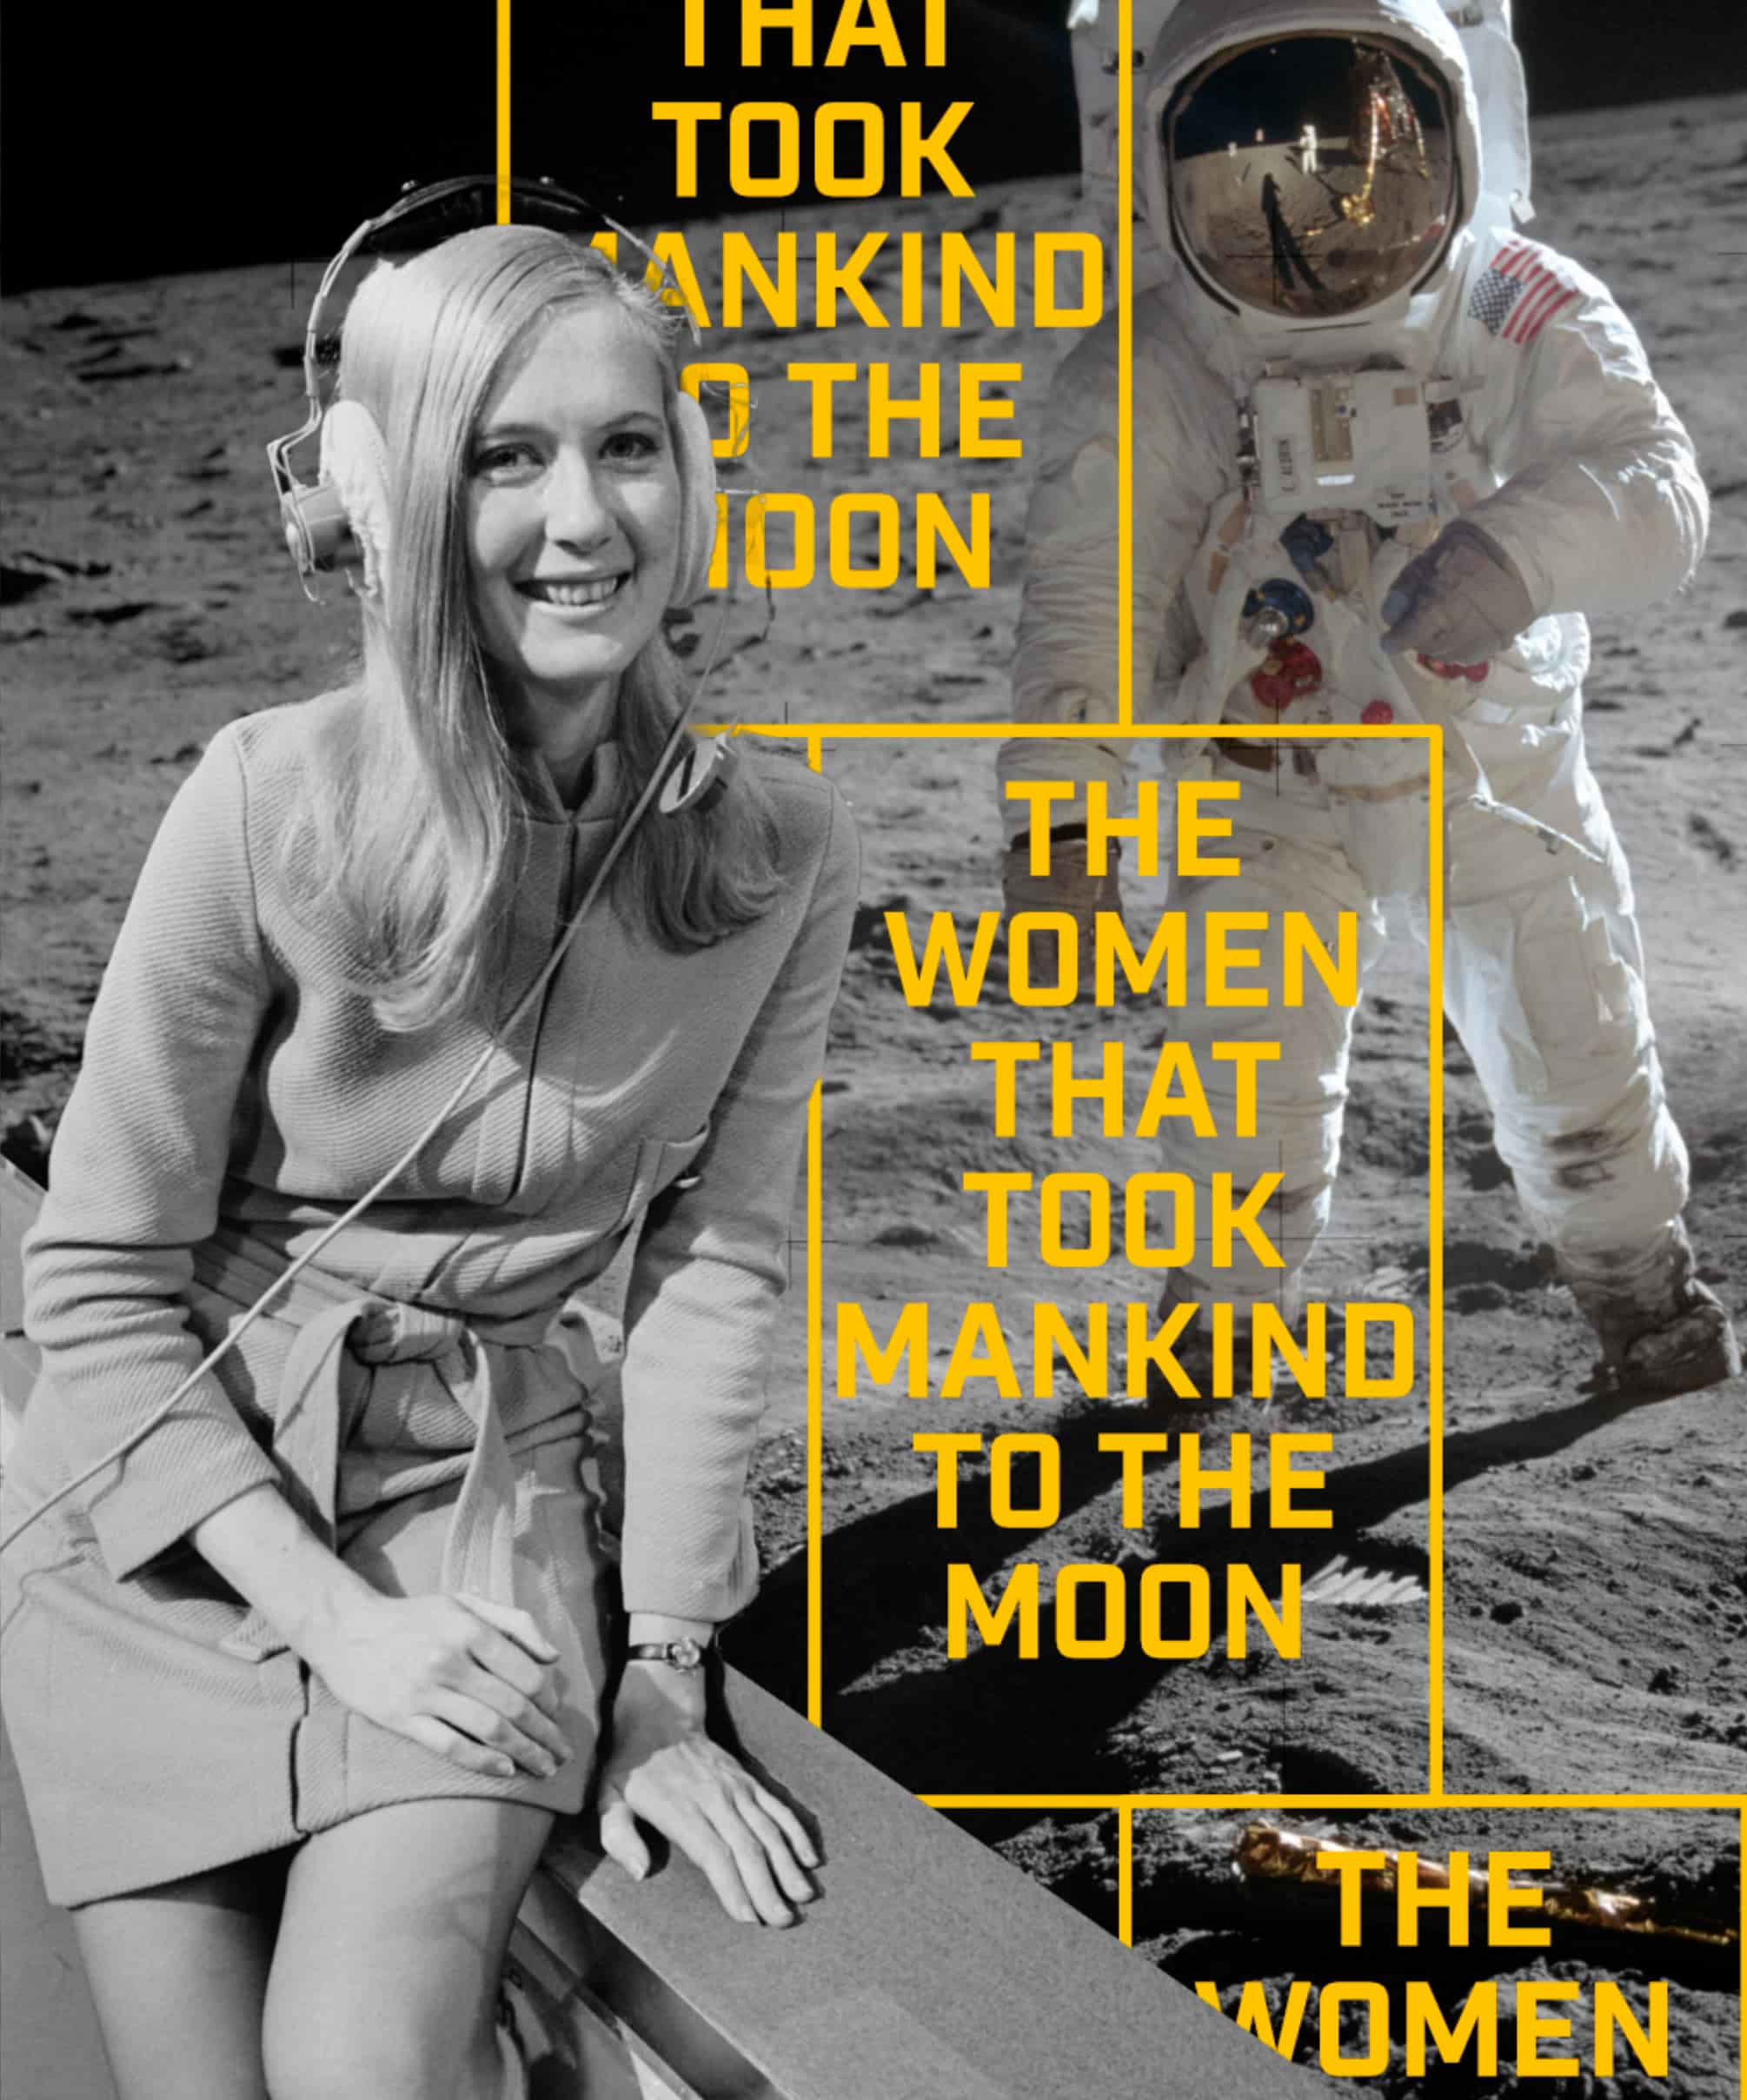 alamanac-the-women-that-took-mankind-to-the-moon-graphic